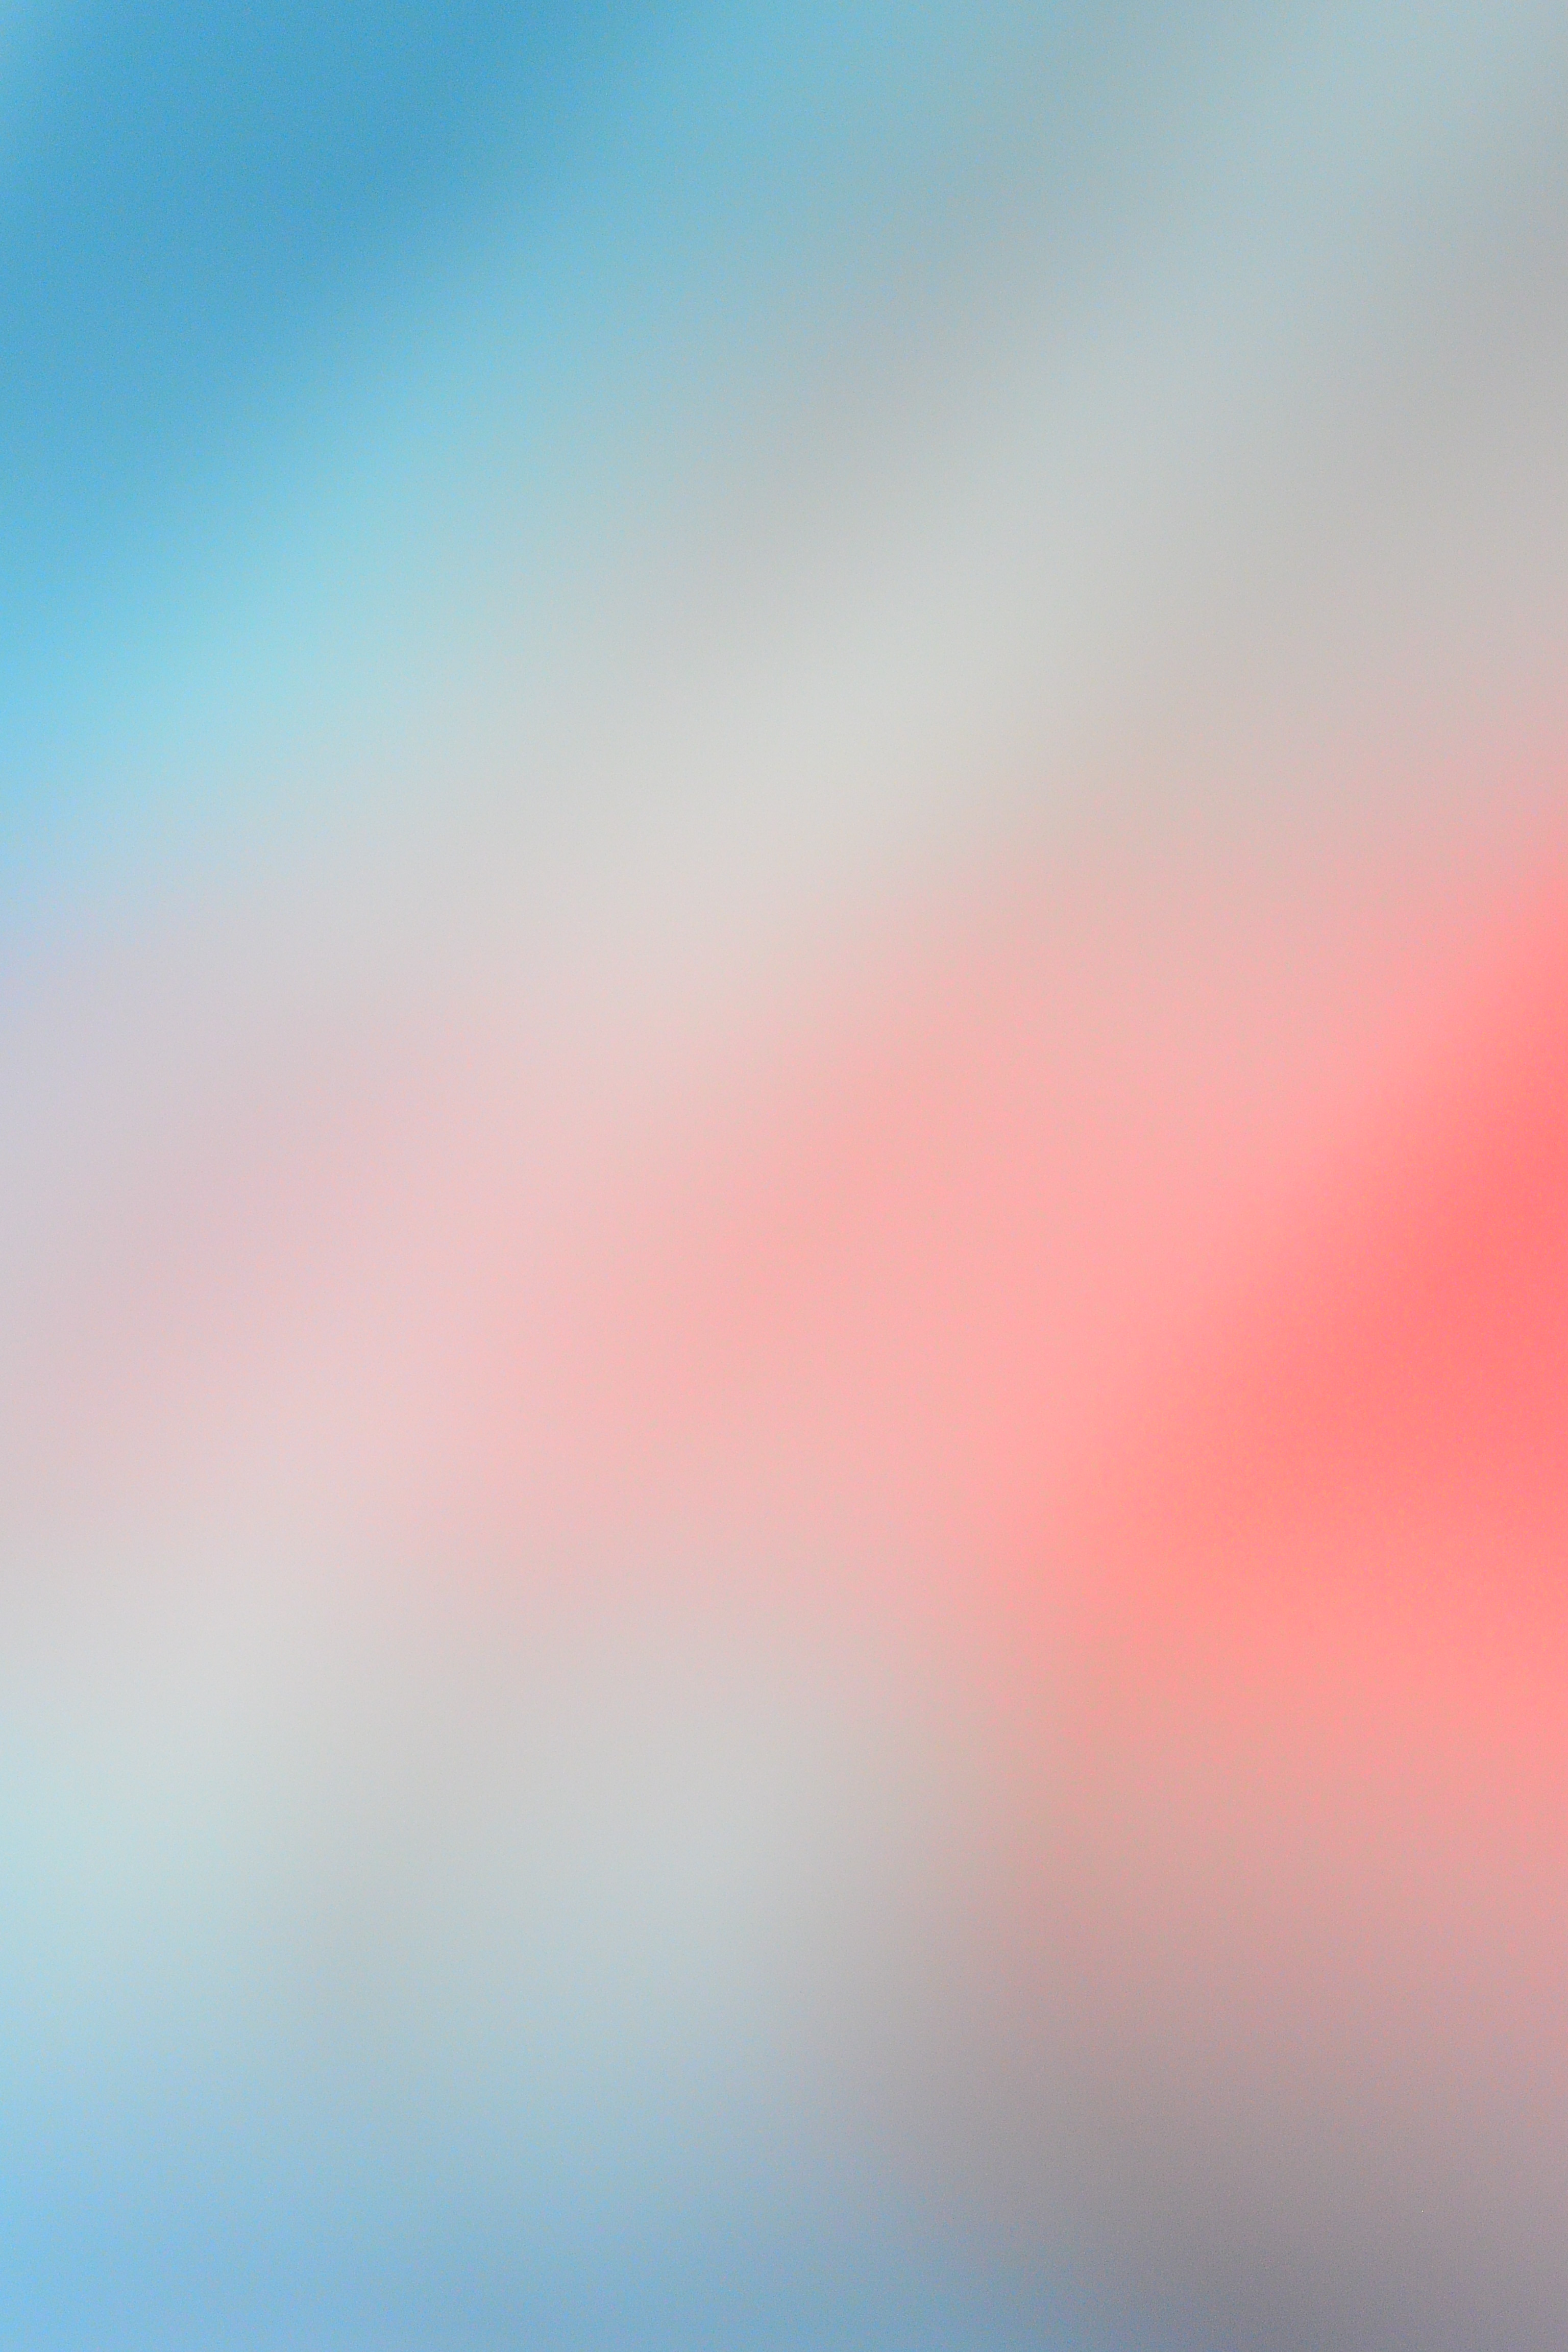 multicolored, gradient, pink, blur, abstract, blue, motley, smooth